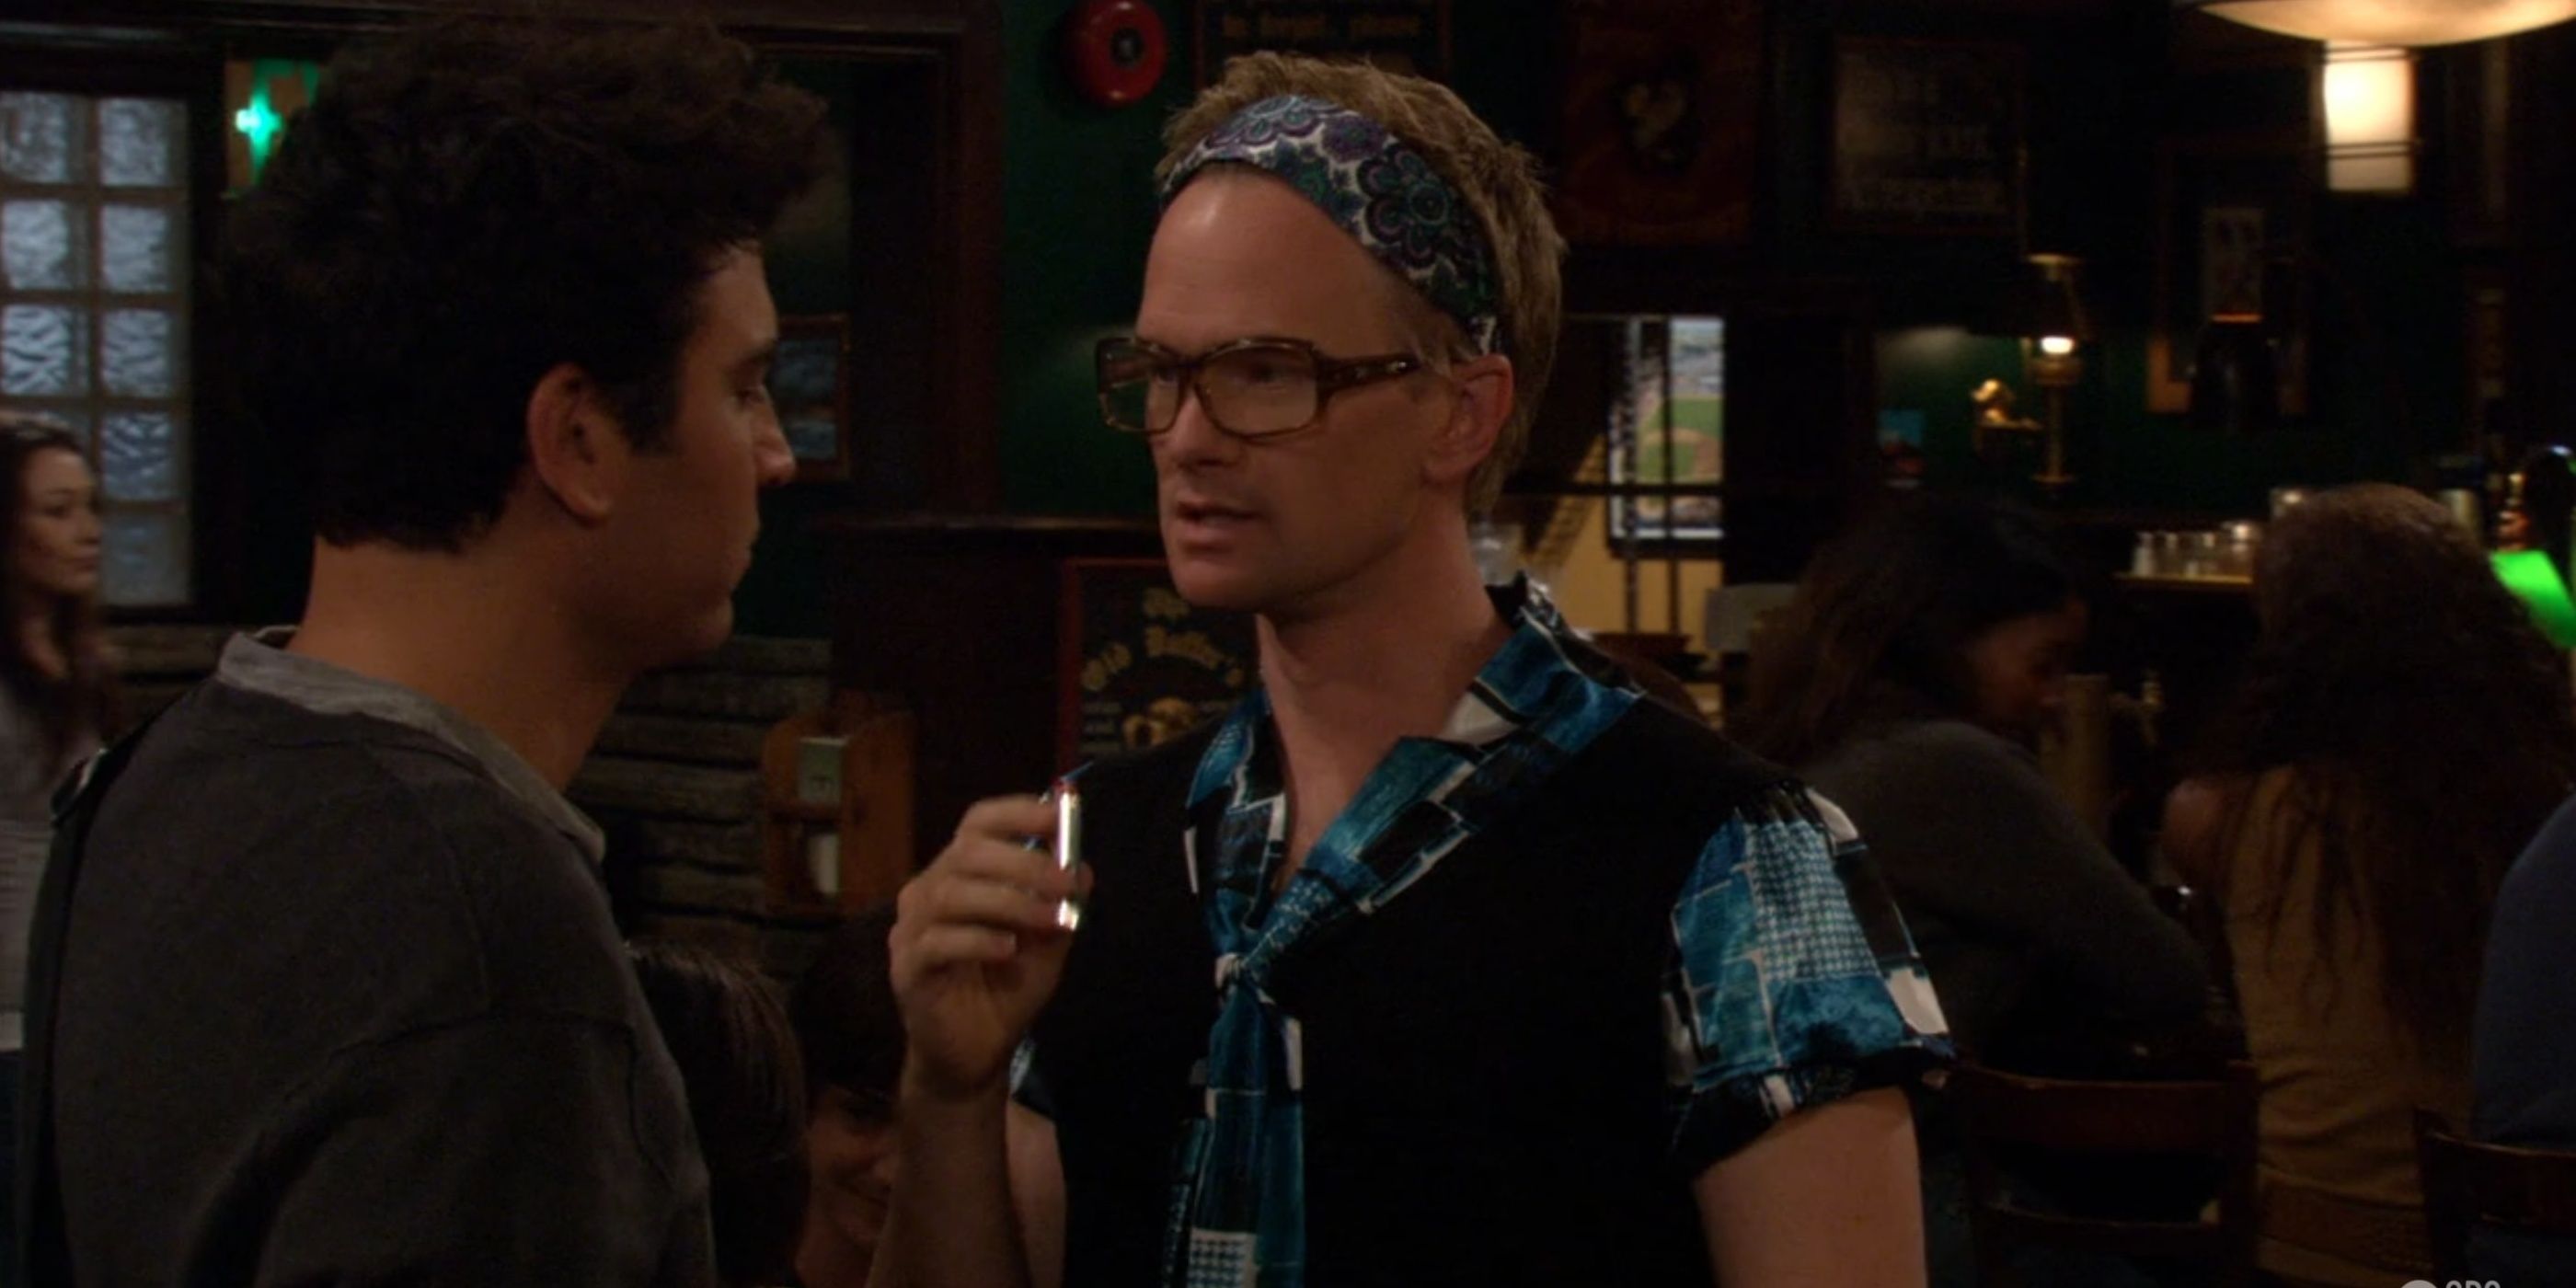 Barney tries to pick up a lesbian in How I Met Your Mother.